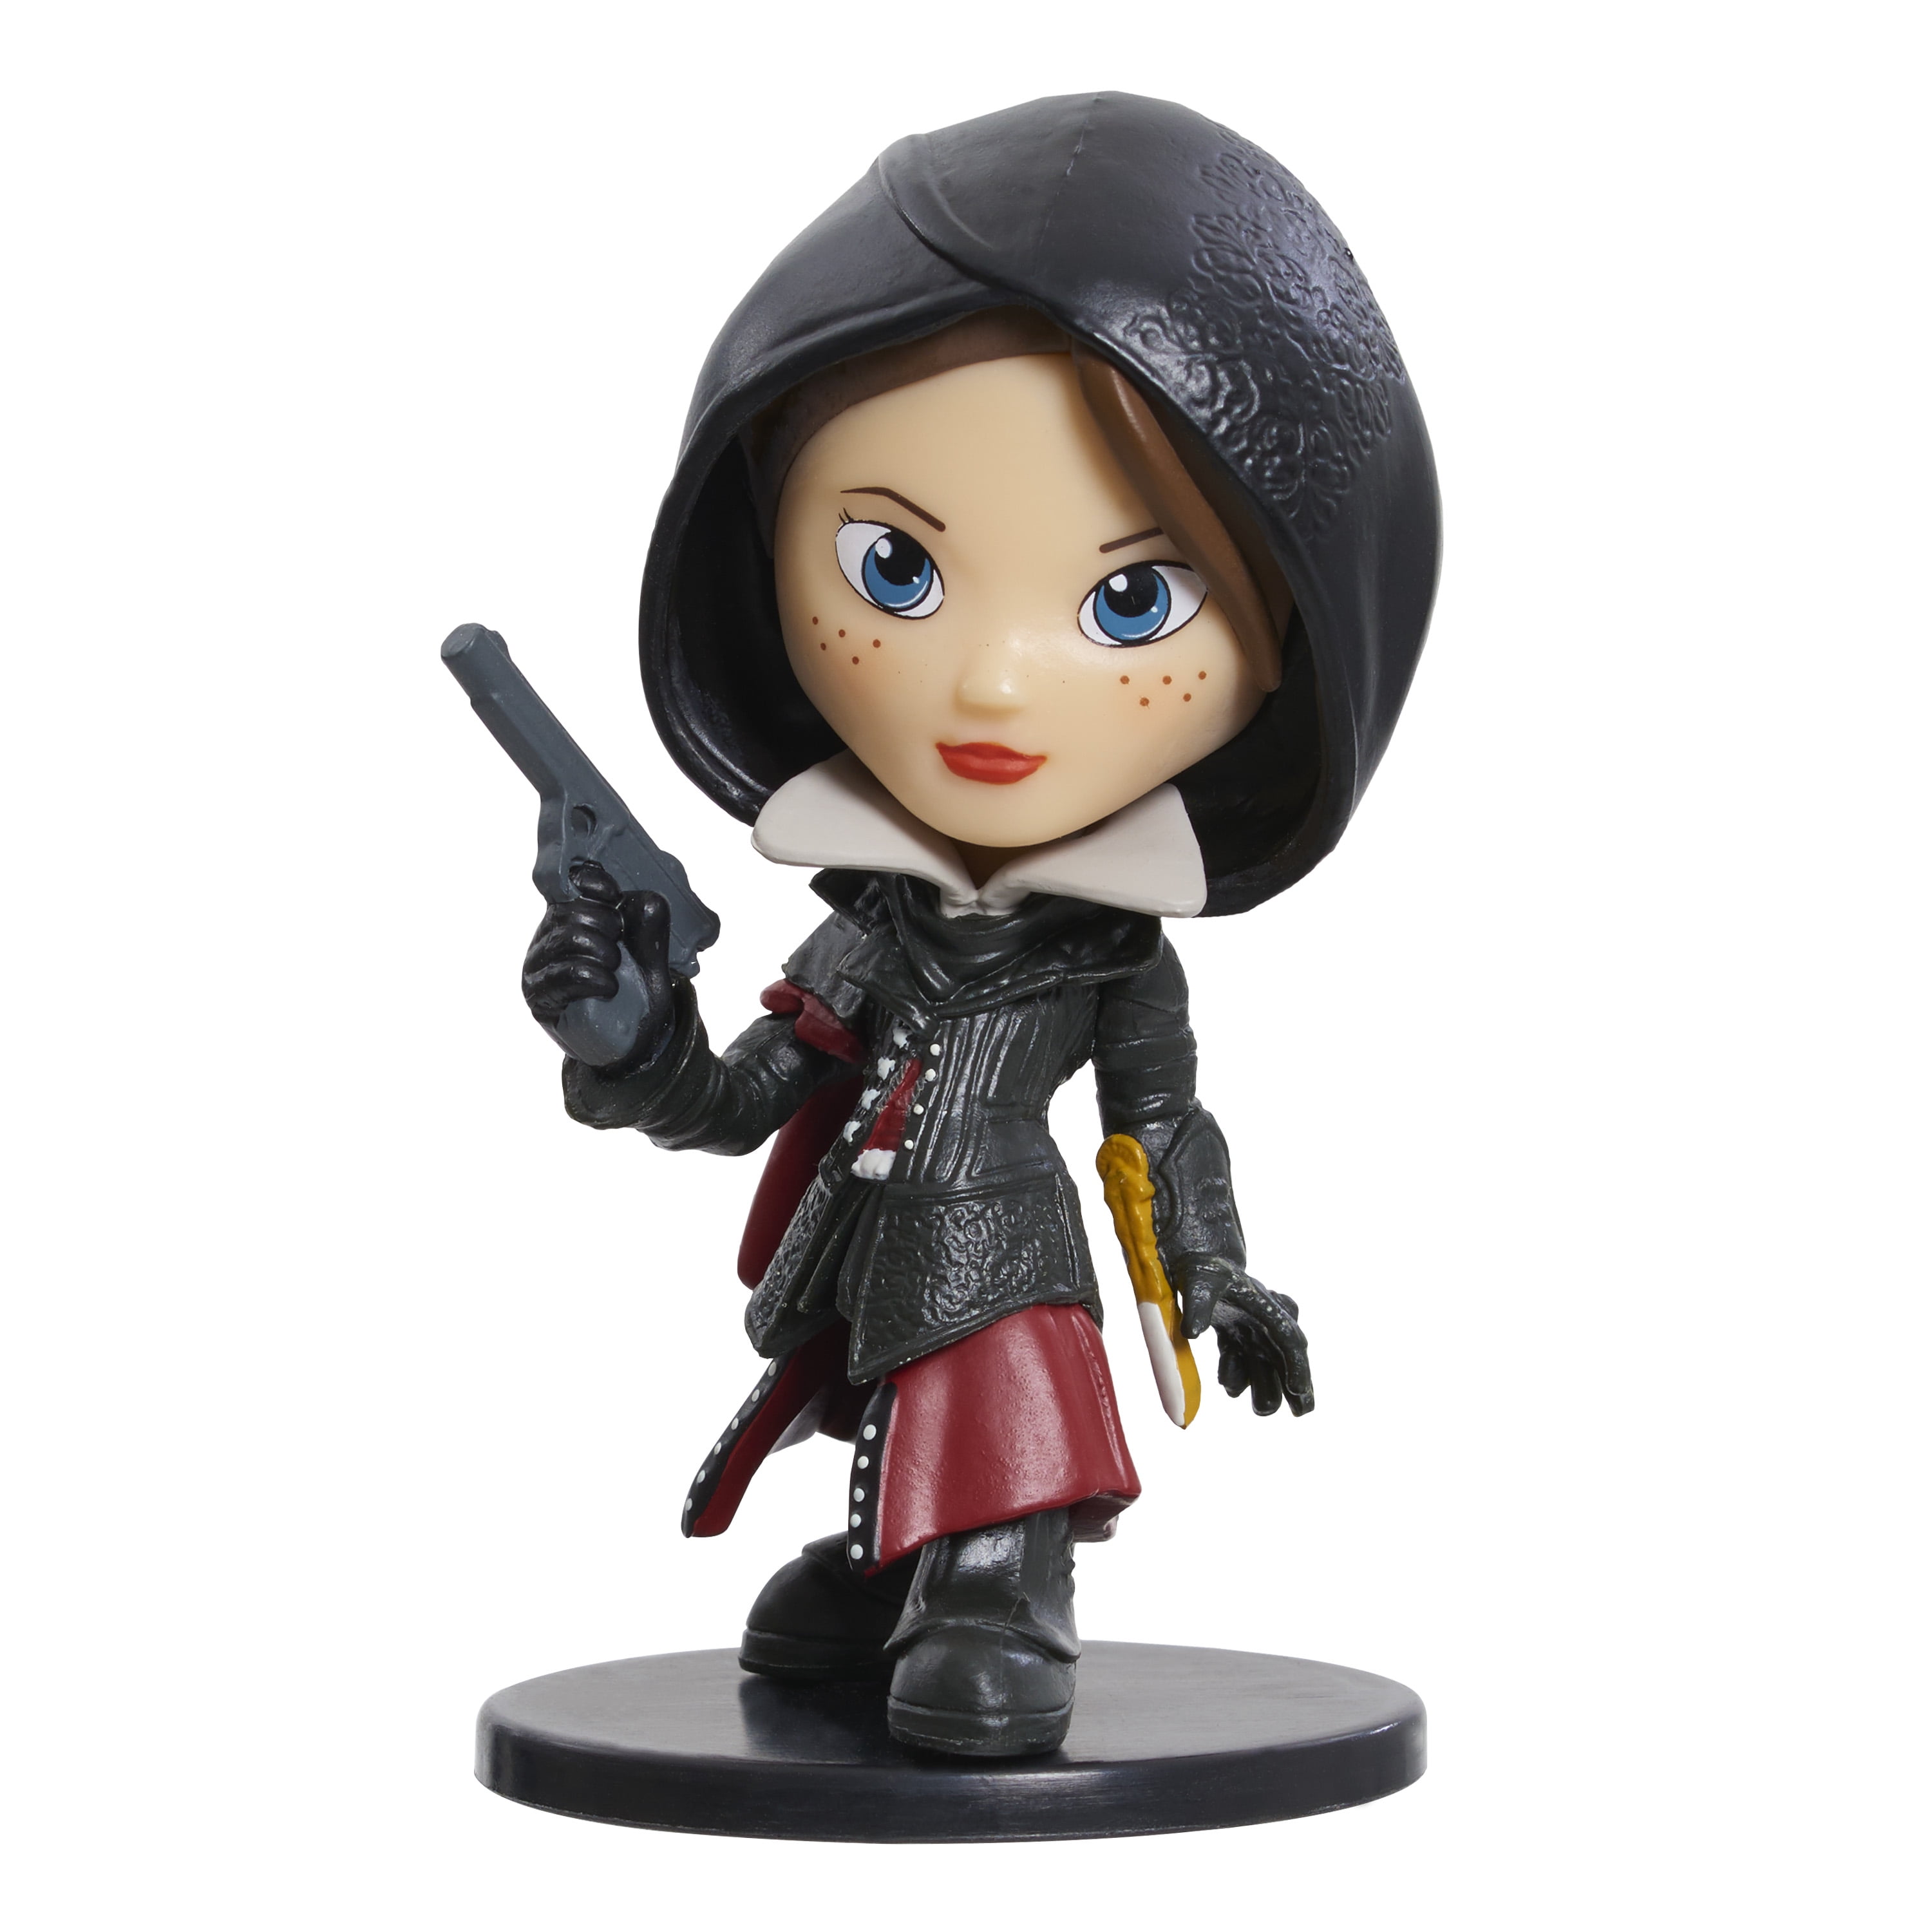 Assassins Creed Evie Series 1 Collectible Figure Ubisoft for sale online